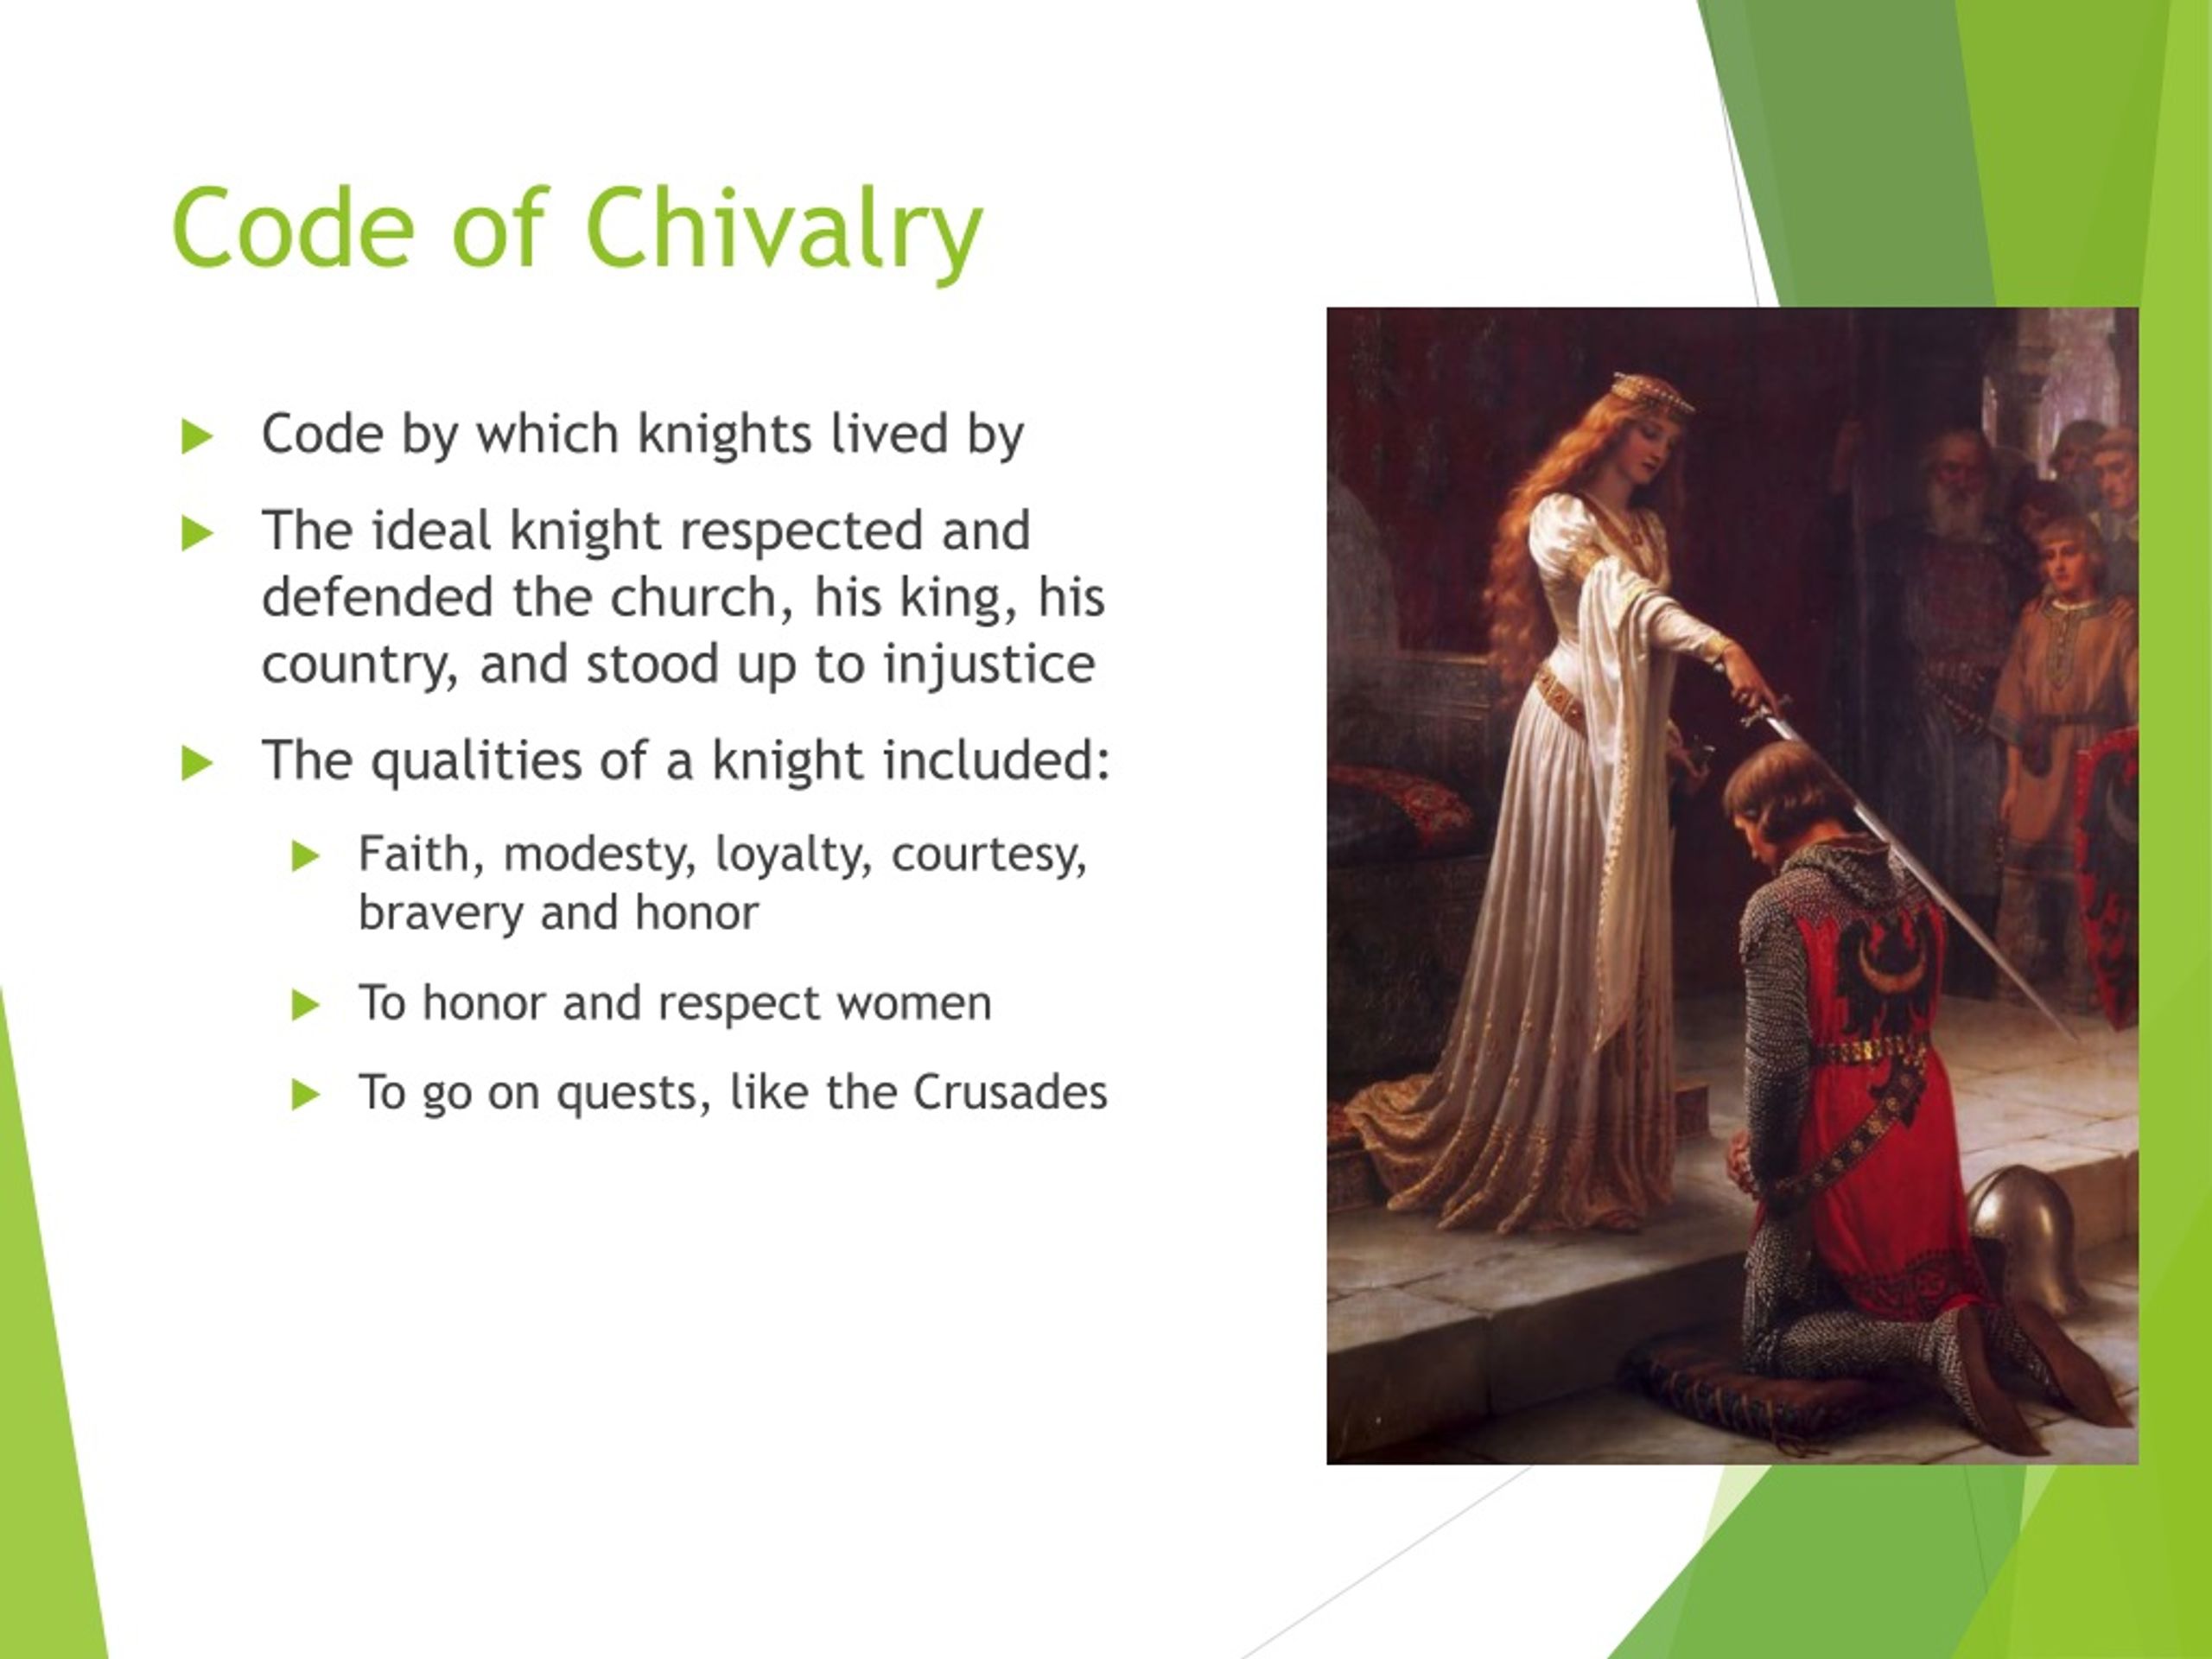 who was expected to uphold the chivalry code